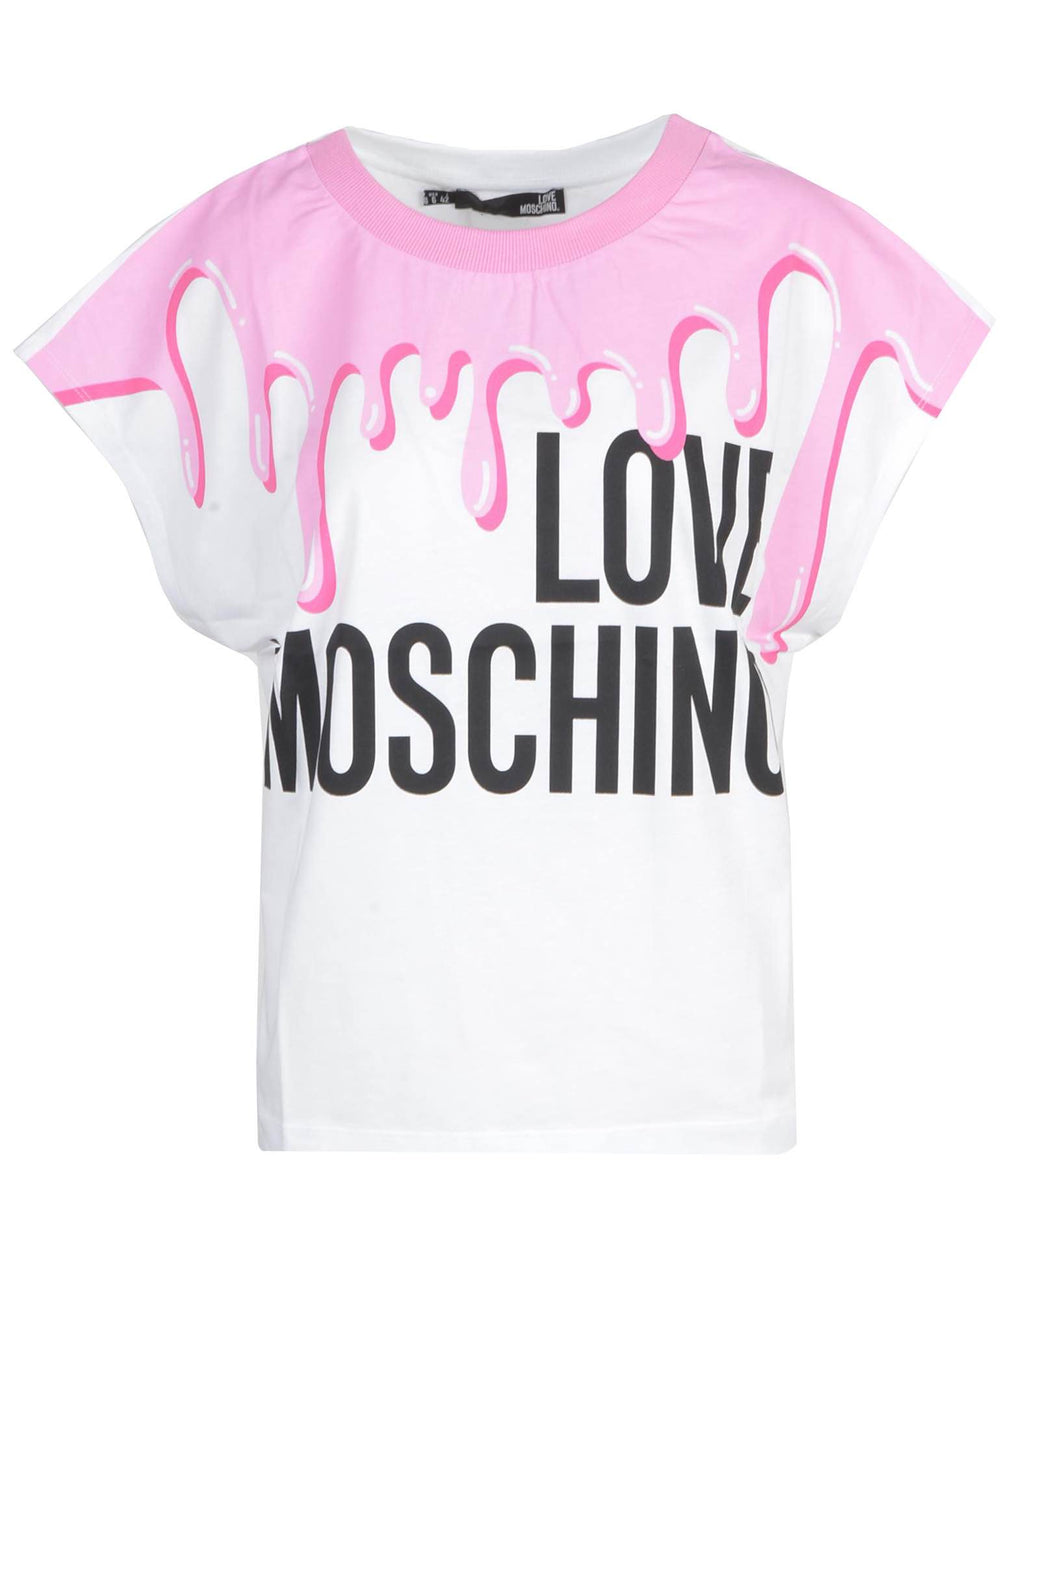 LOVE MOSCHINO Women's T-shirt White Cotton Short Sleeve Relaxed Fit Pink